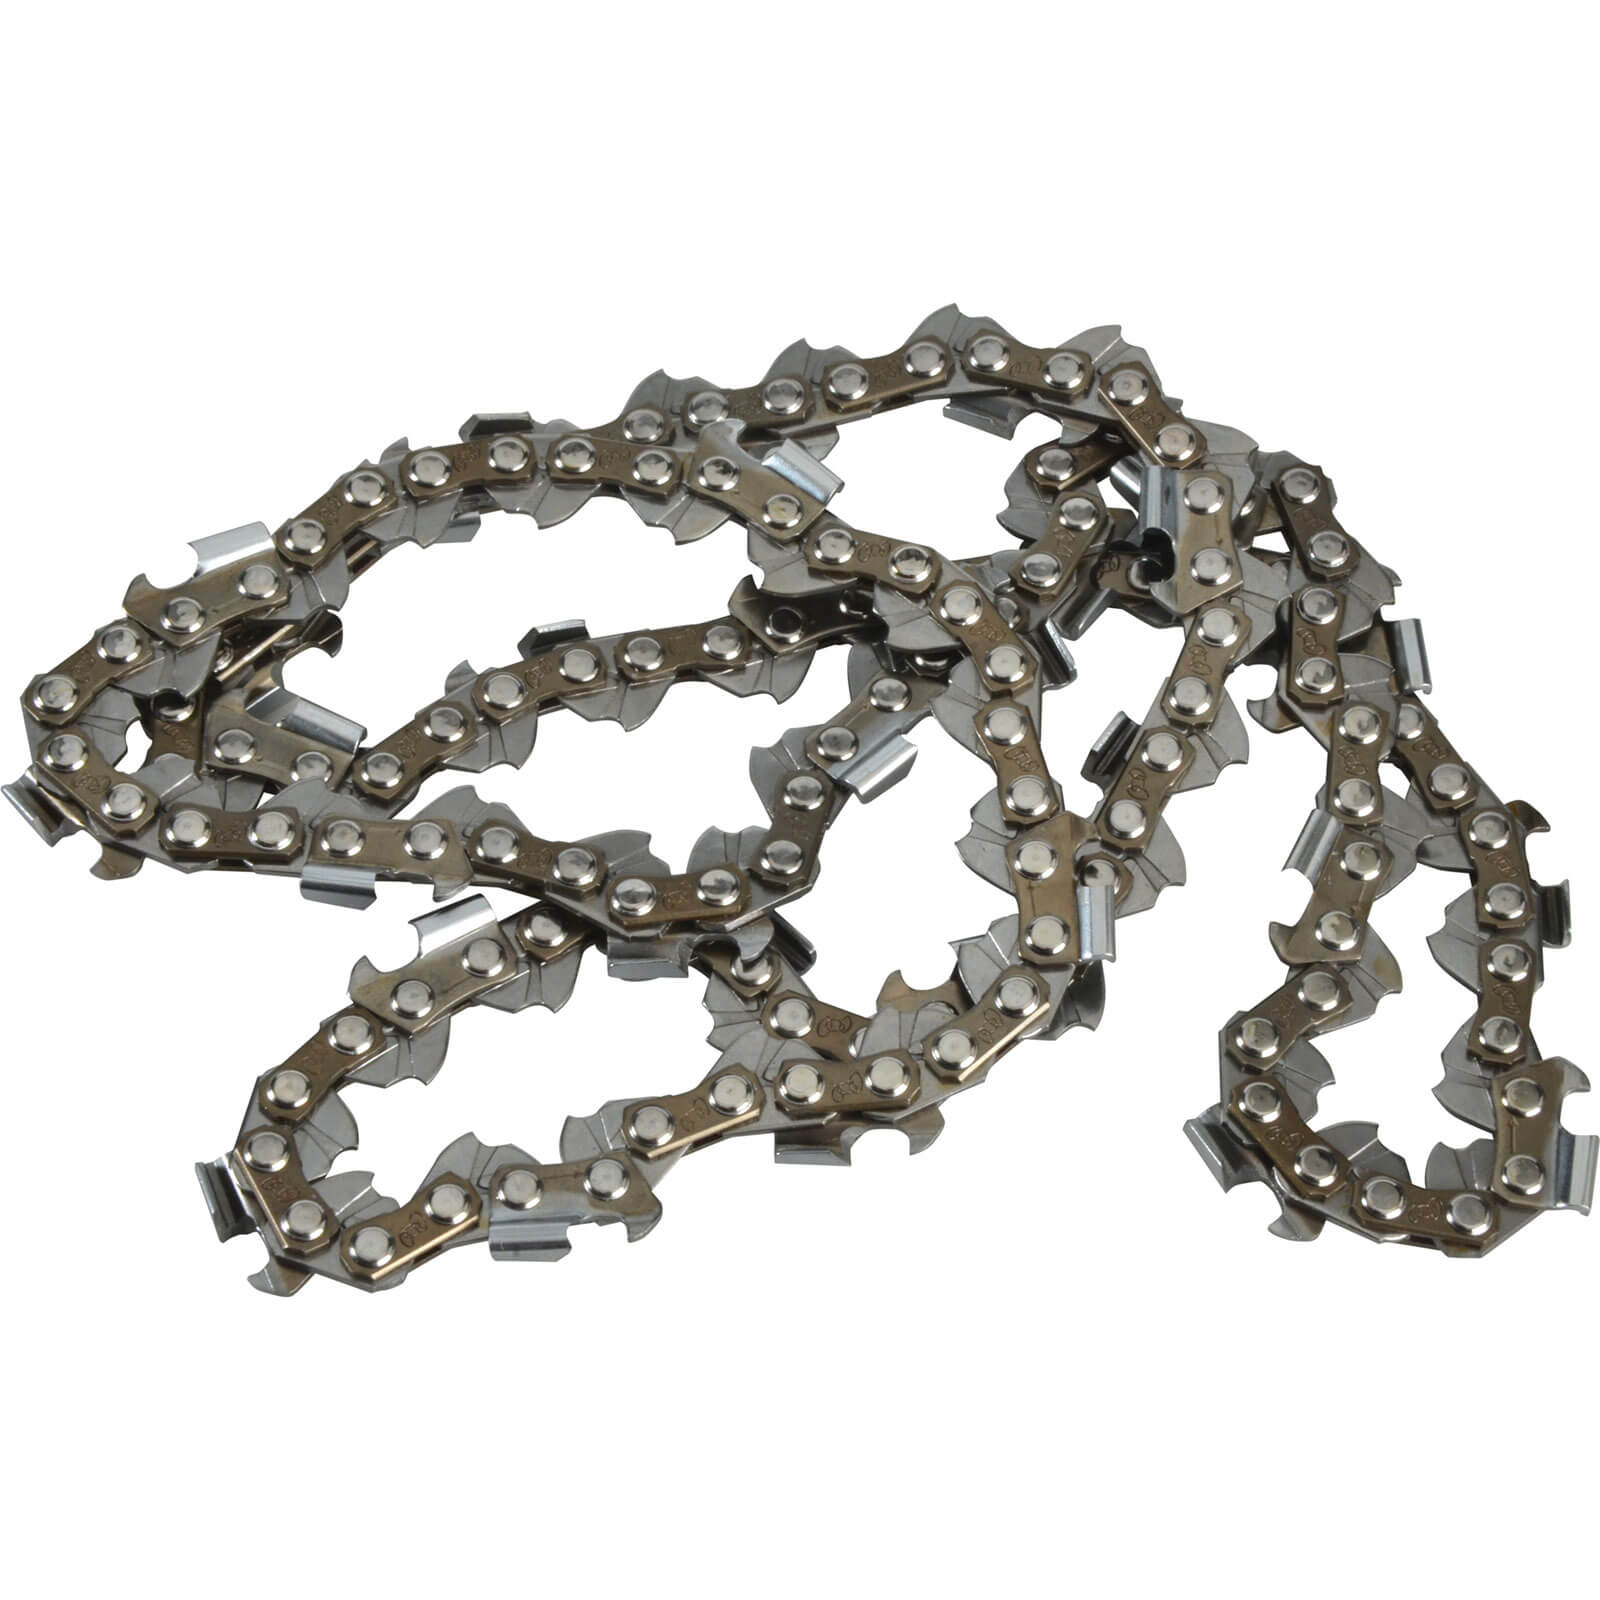 Photo of Alm Ch062 Replacement Chainsaw Chain Fits Saws With A 46cm Bar And 62 Drive Links 460mm